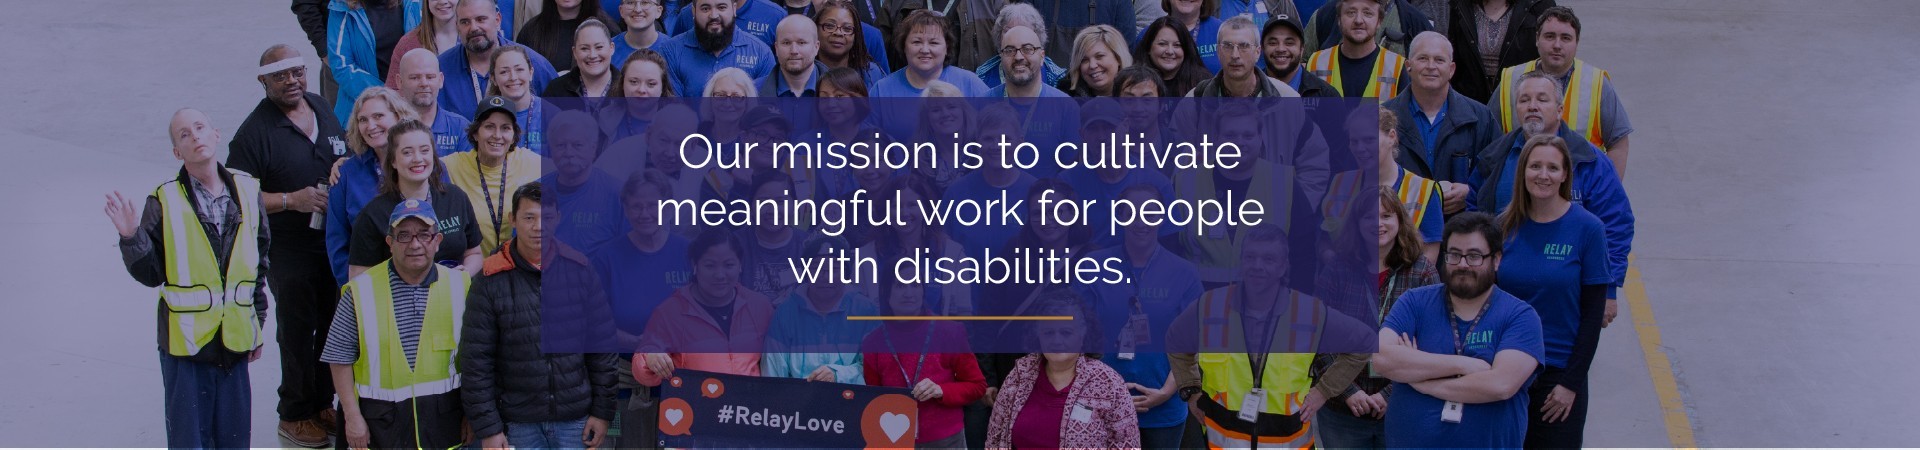 Our mission is to cultivate meaningful work for people with disabilities.